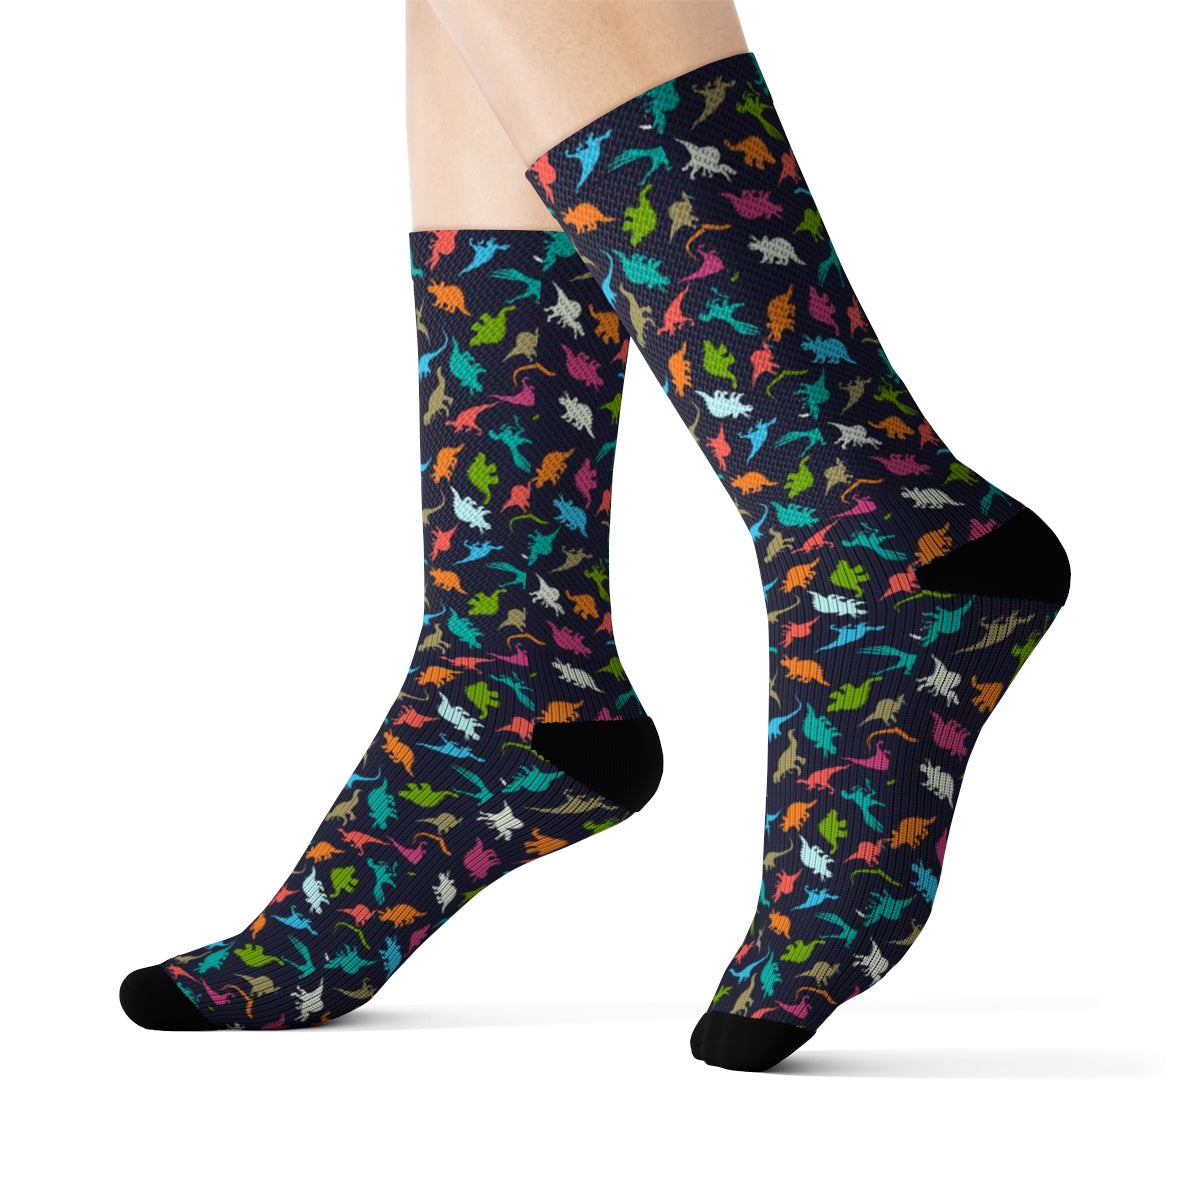 Dinosaur Socks, Dino 3D Printed Sublimation Trex Women Men Funny Fun Novelty Cool Funky Crazy Casual Cute Unique Colorful Gift Starcove Fashion